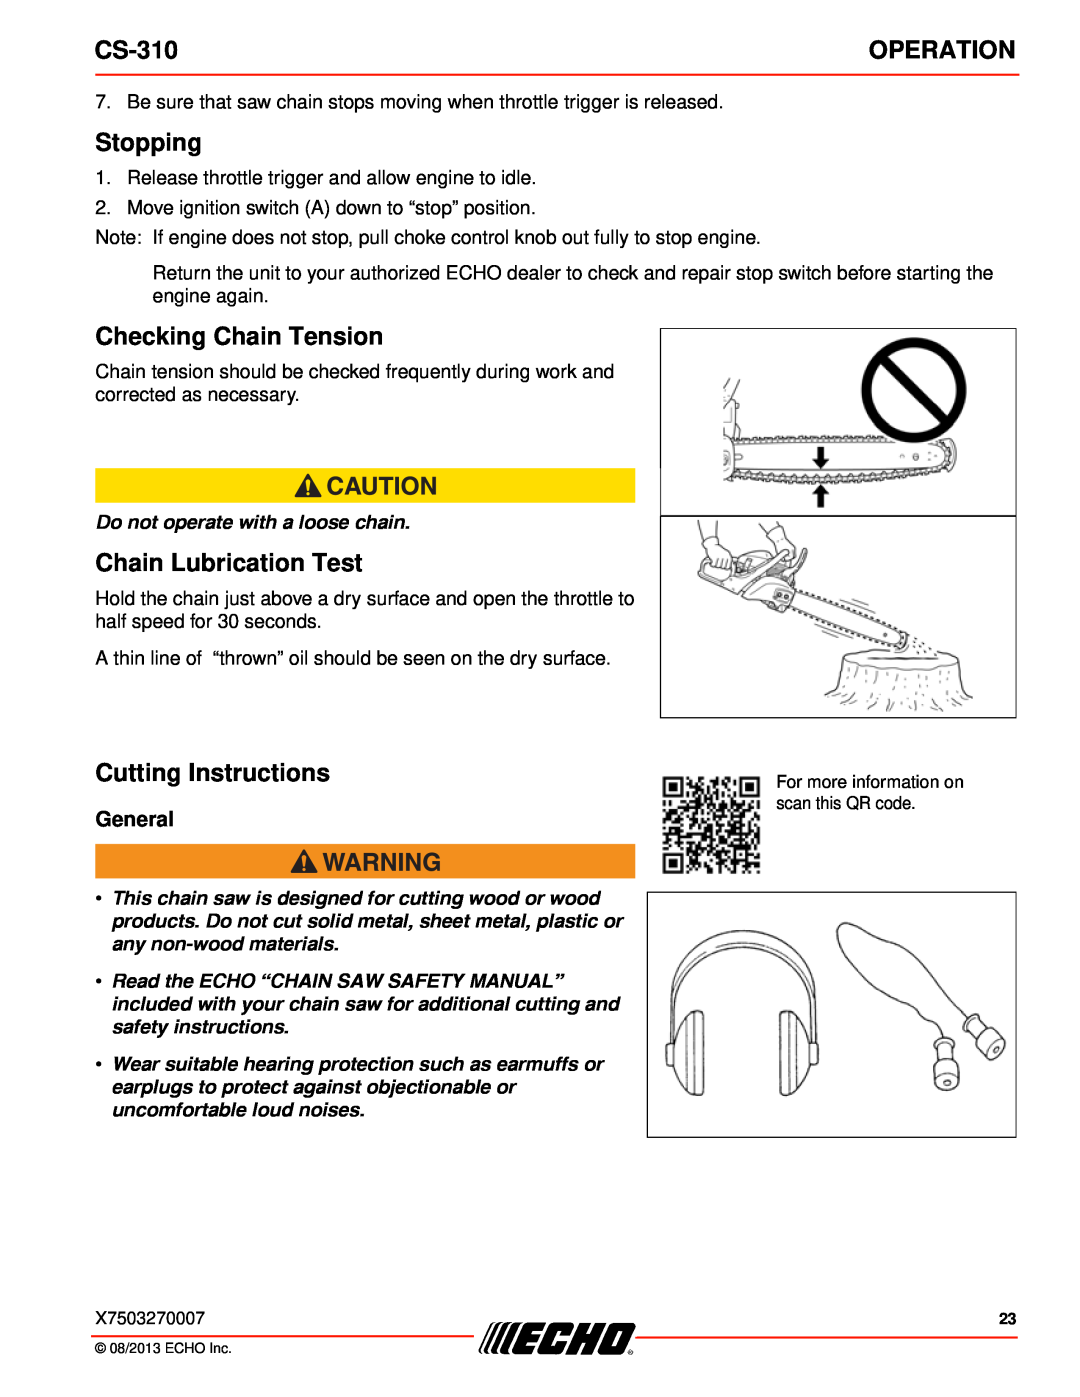 Echo CS-310 Stopping, Checking Chain Tension, Chain Lubrication Test, Cutting Instructions, General, Operation 